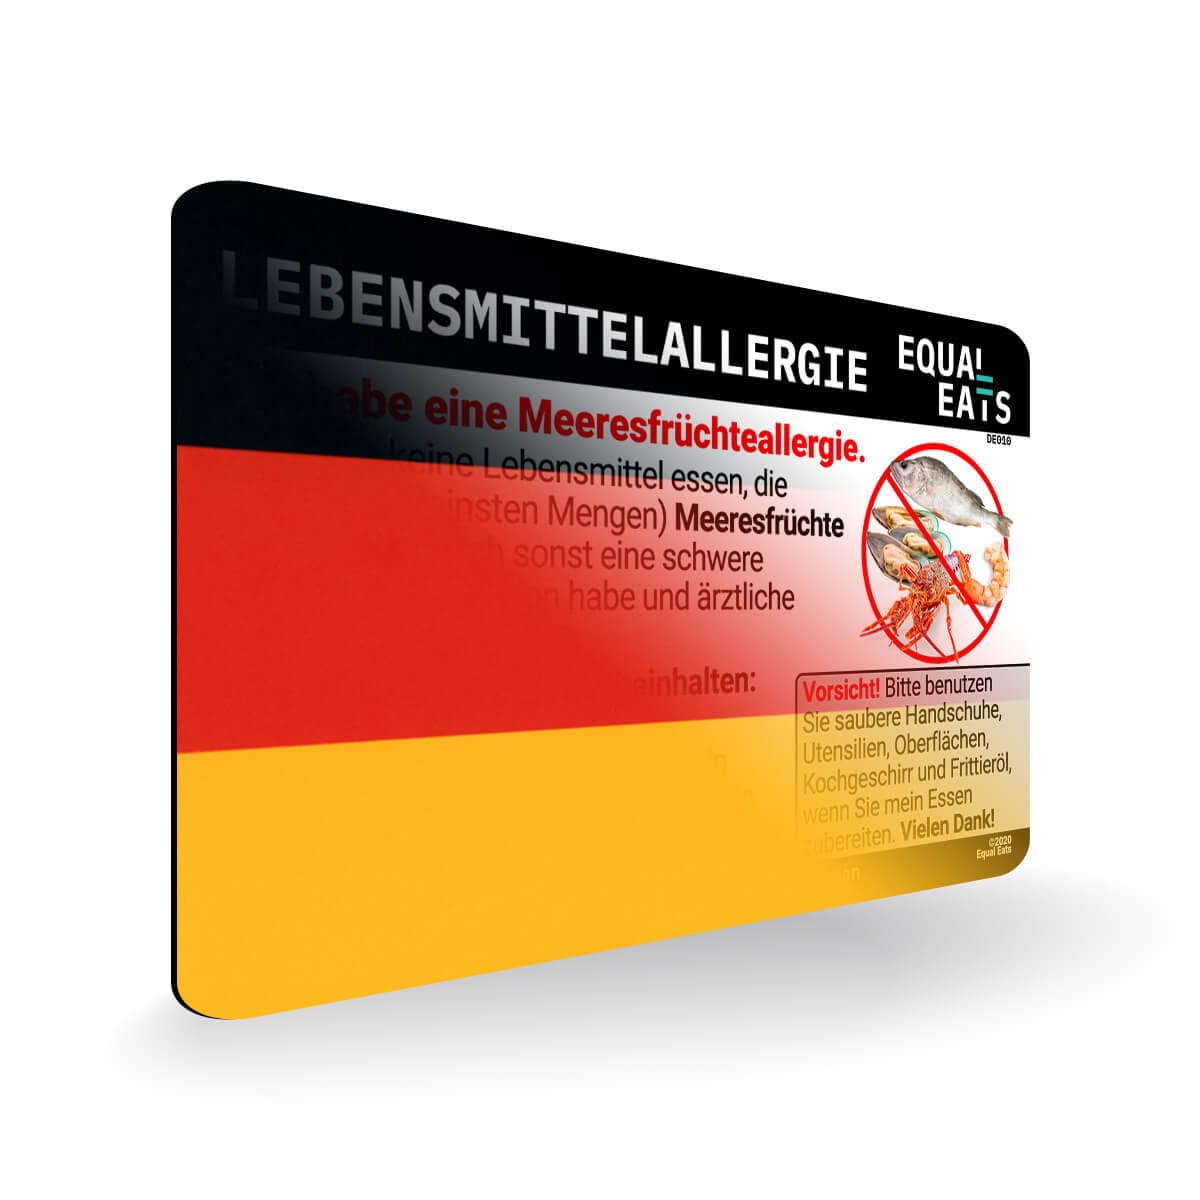 Seafood Allergy in German. Seafood Allergy Card for Germany